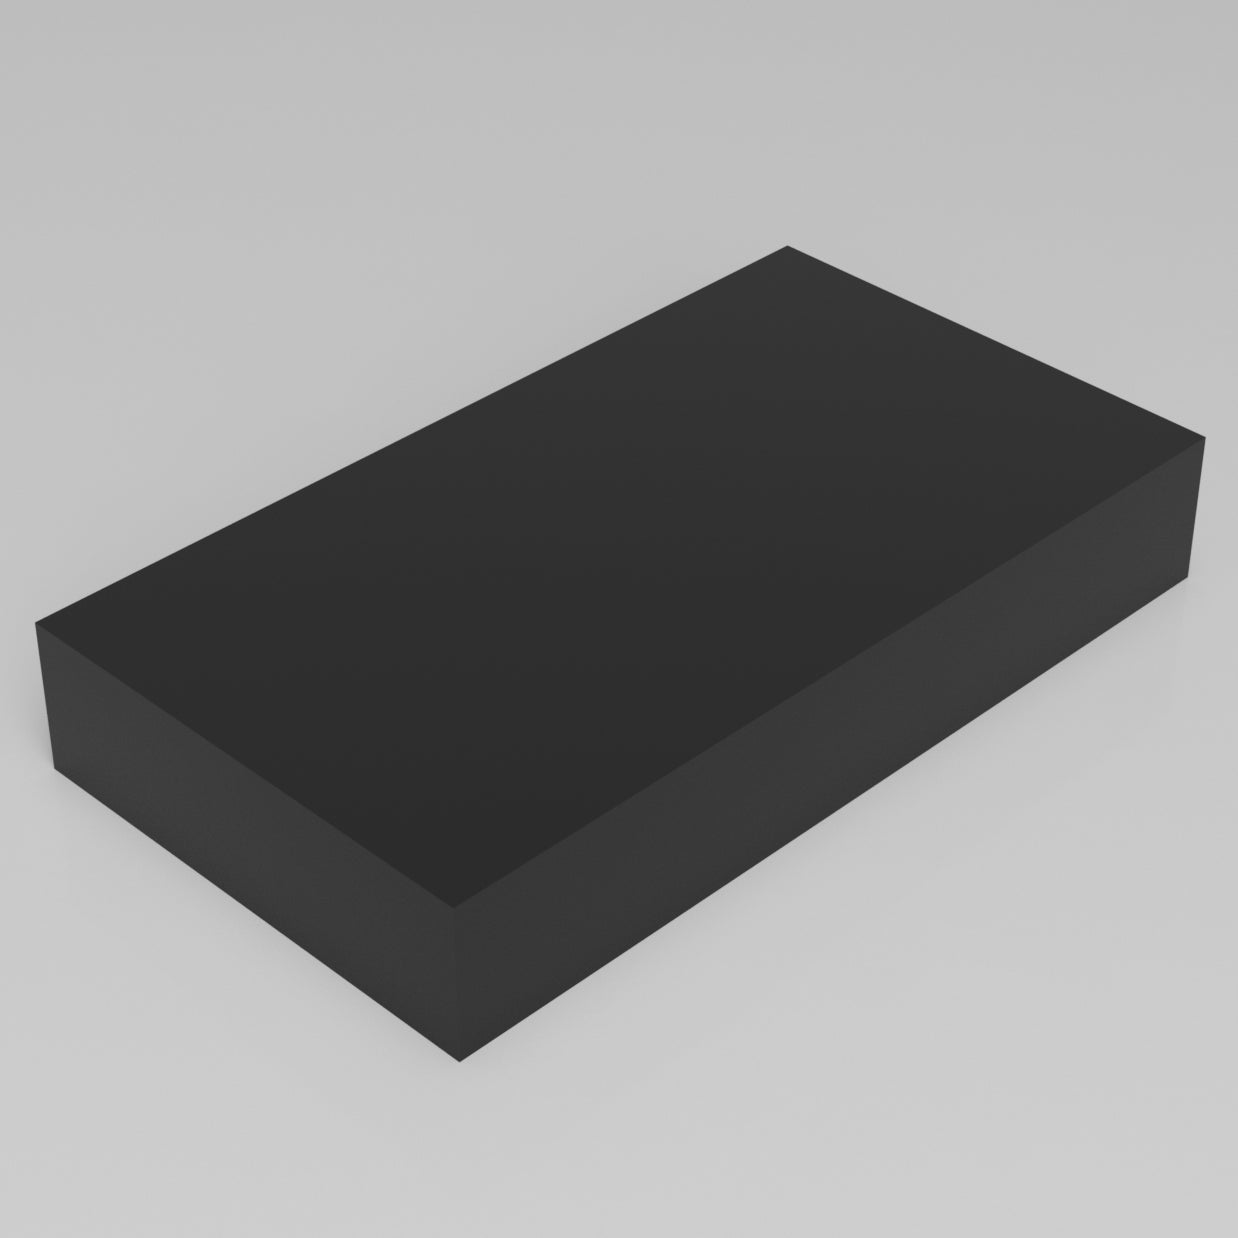 Machinable Wax Rectangular Block Front View 3 Inch by 10 Inch by 18 Inch